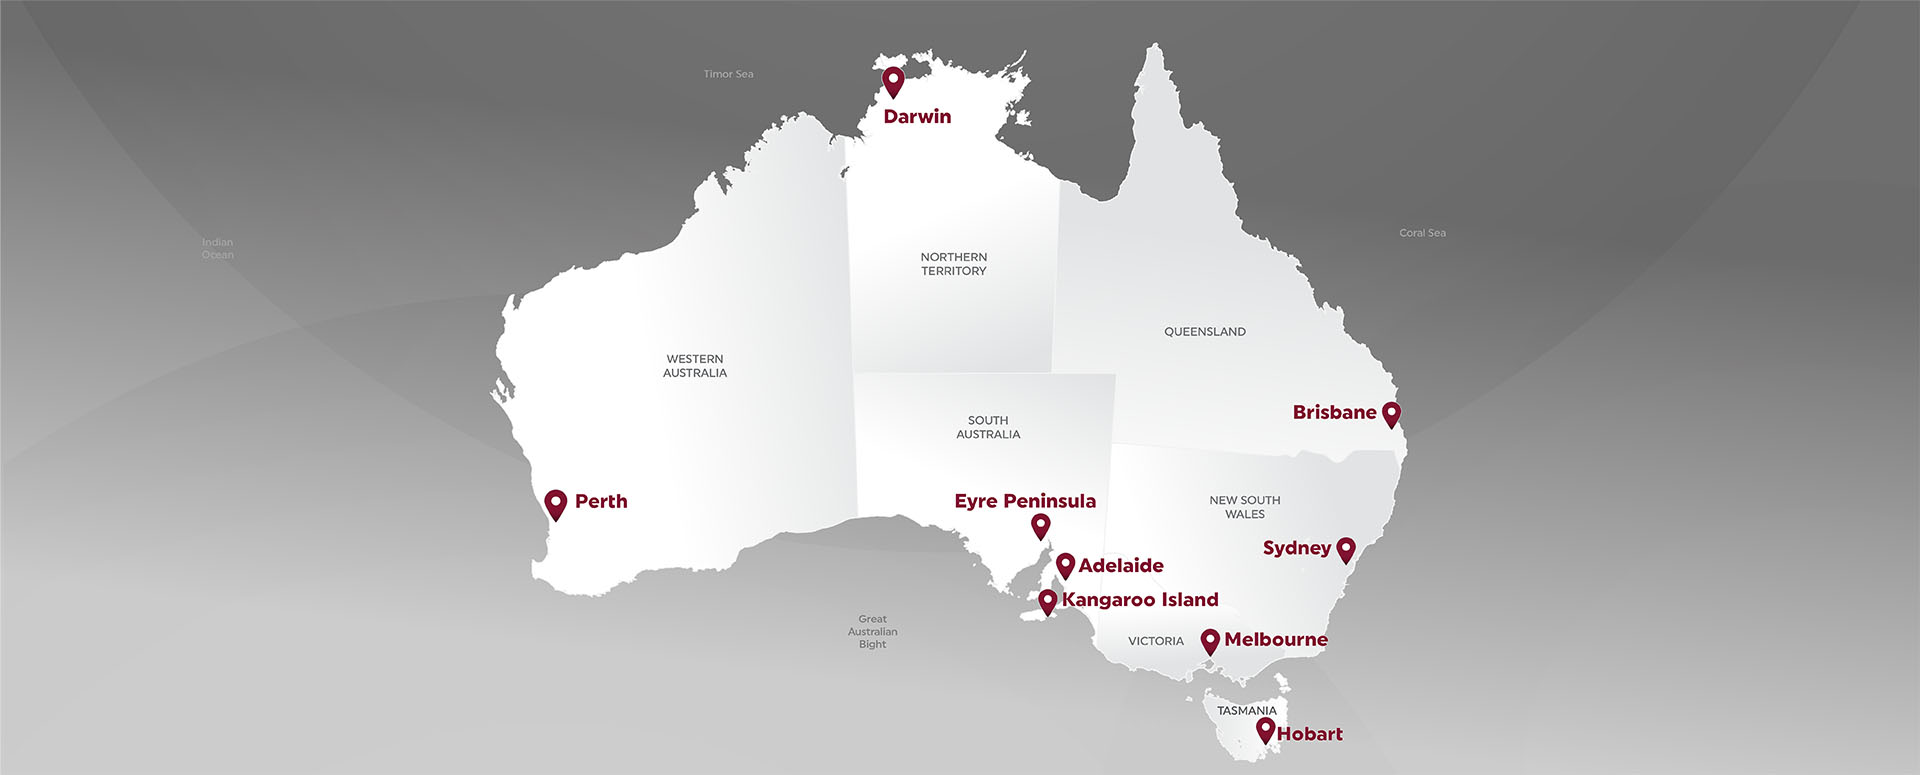 A map of Australia showing cities where our offices are located.